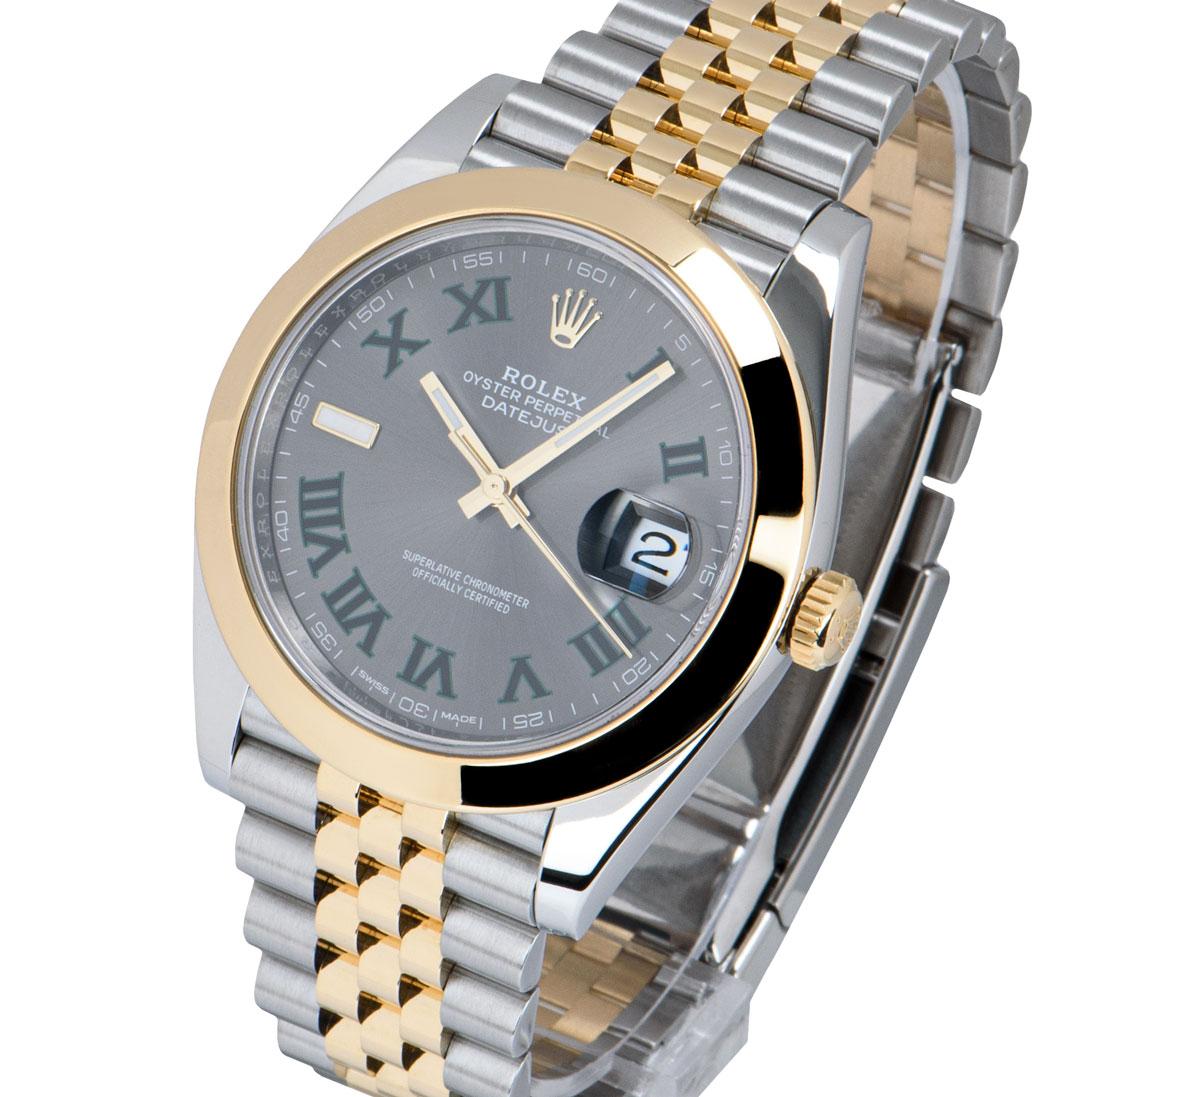 Unworn Rolex Datejust 41mm Wimbledon Dial 126303 In New Condition For Sale In London, GB